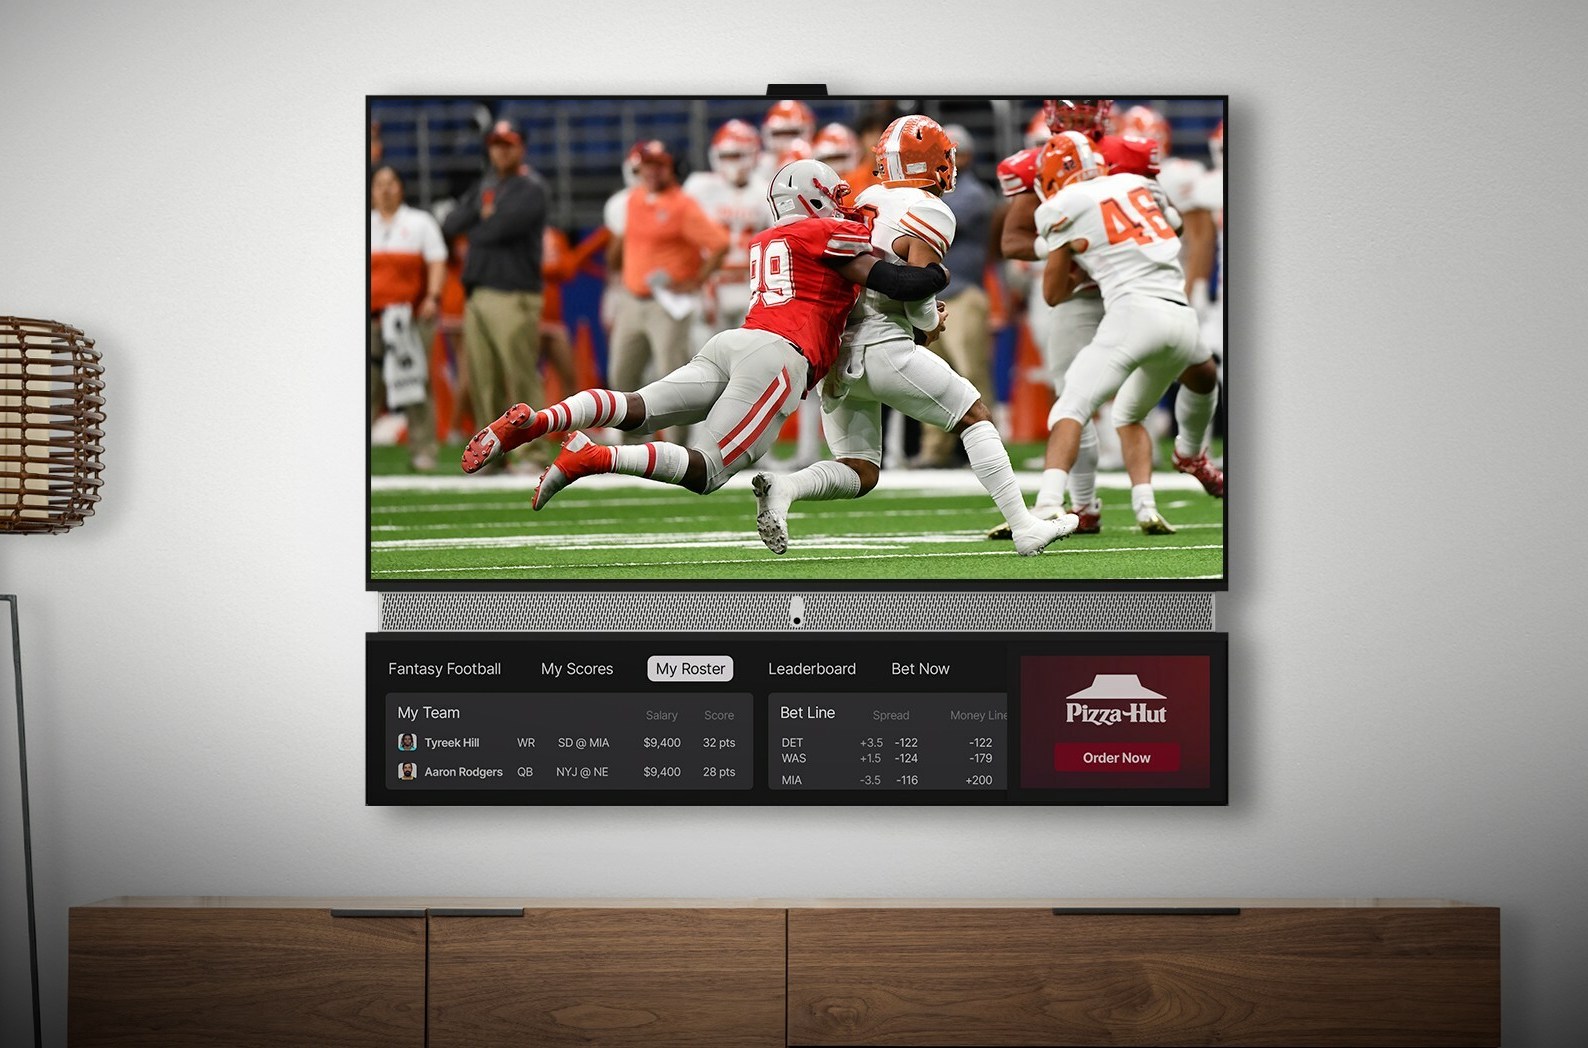 Telly, the ‘free’ smart TV with ads, has privacy policy red flags